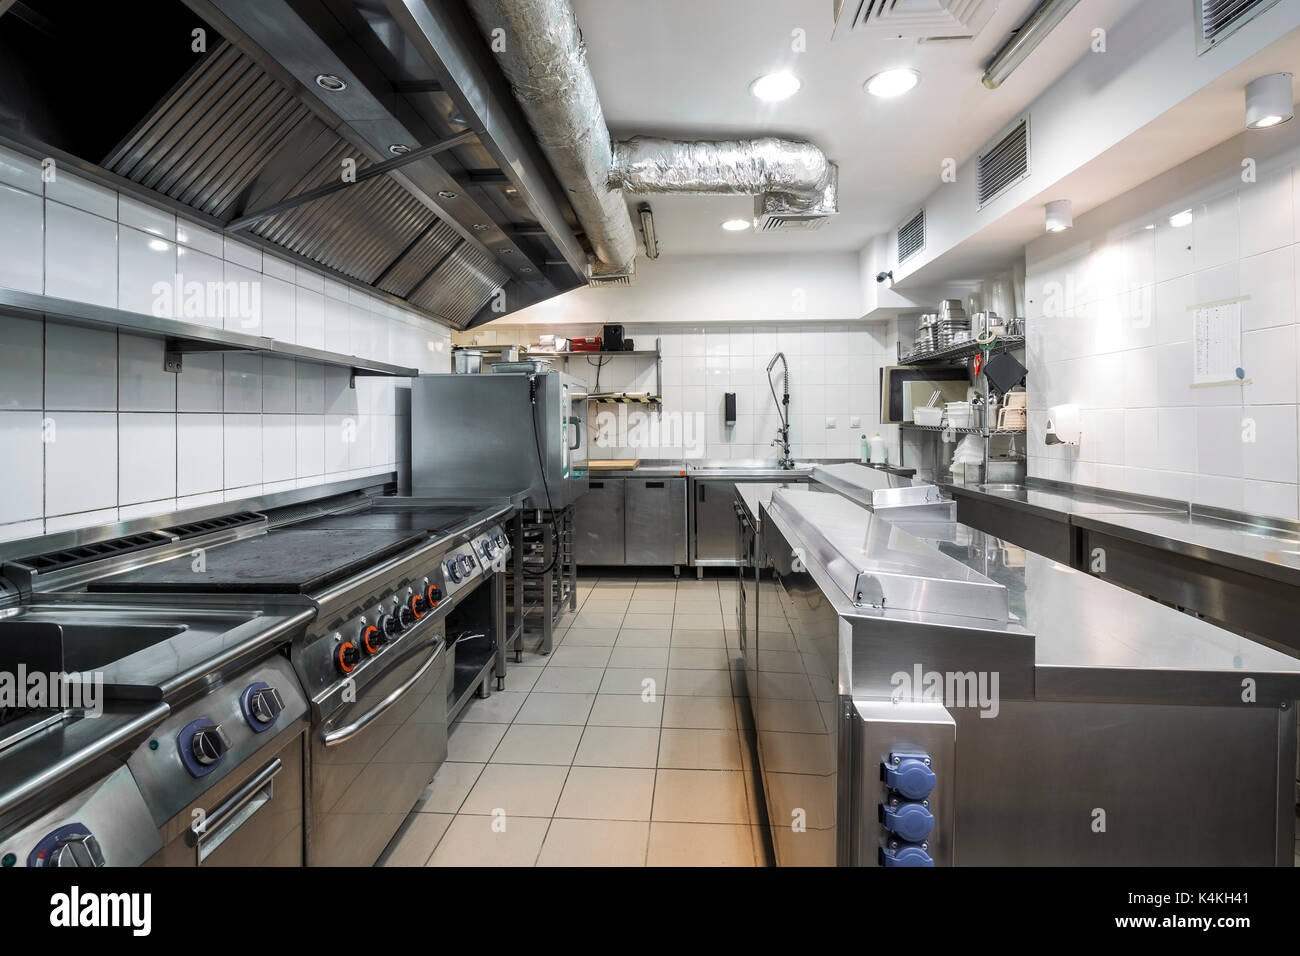 Commercial kitchen in a restaurant with stainless equipment Stock Photo